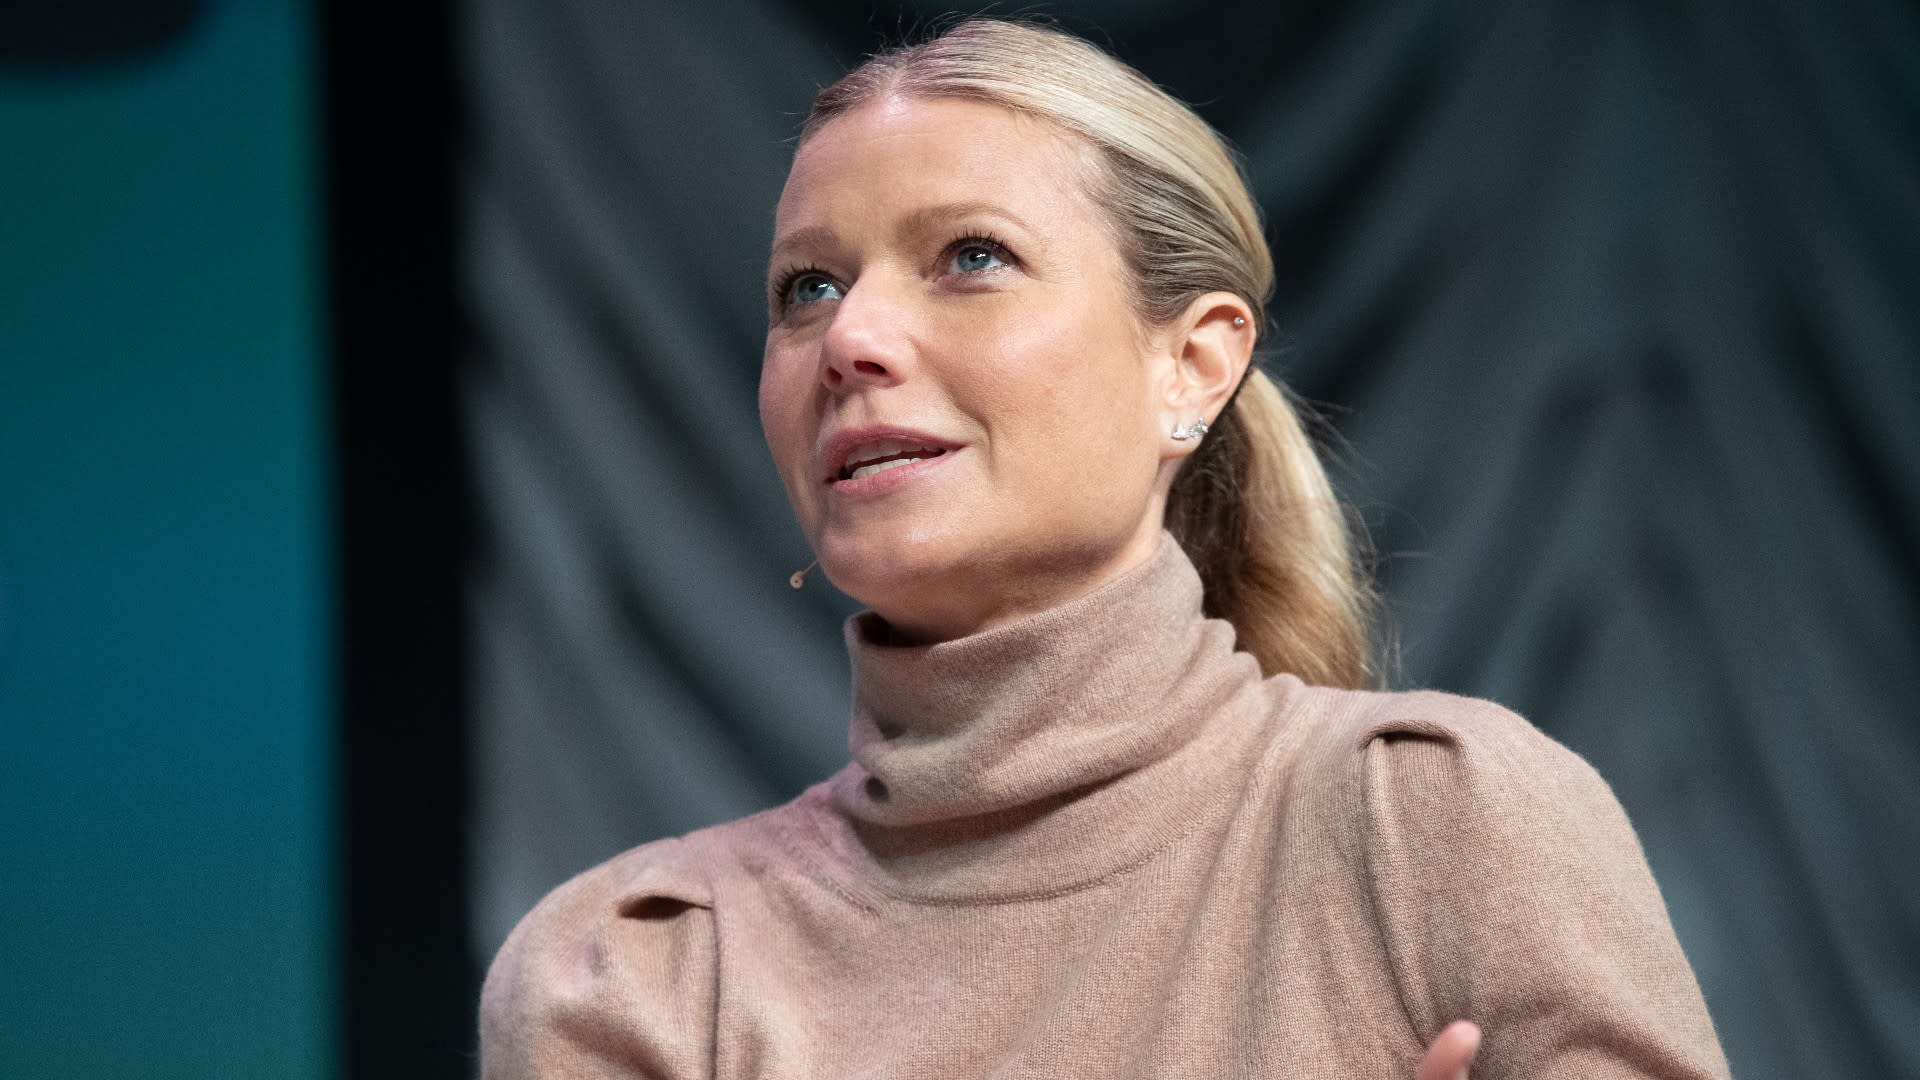 Gwyneth Paltrow Gets Candid About Conscious Uncoupling Backlash And How